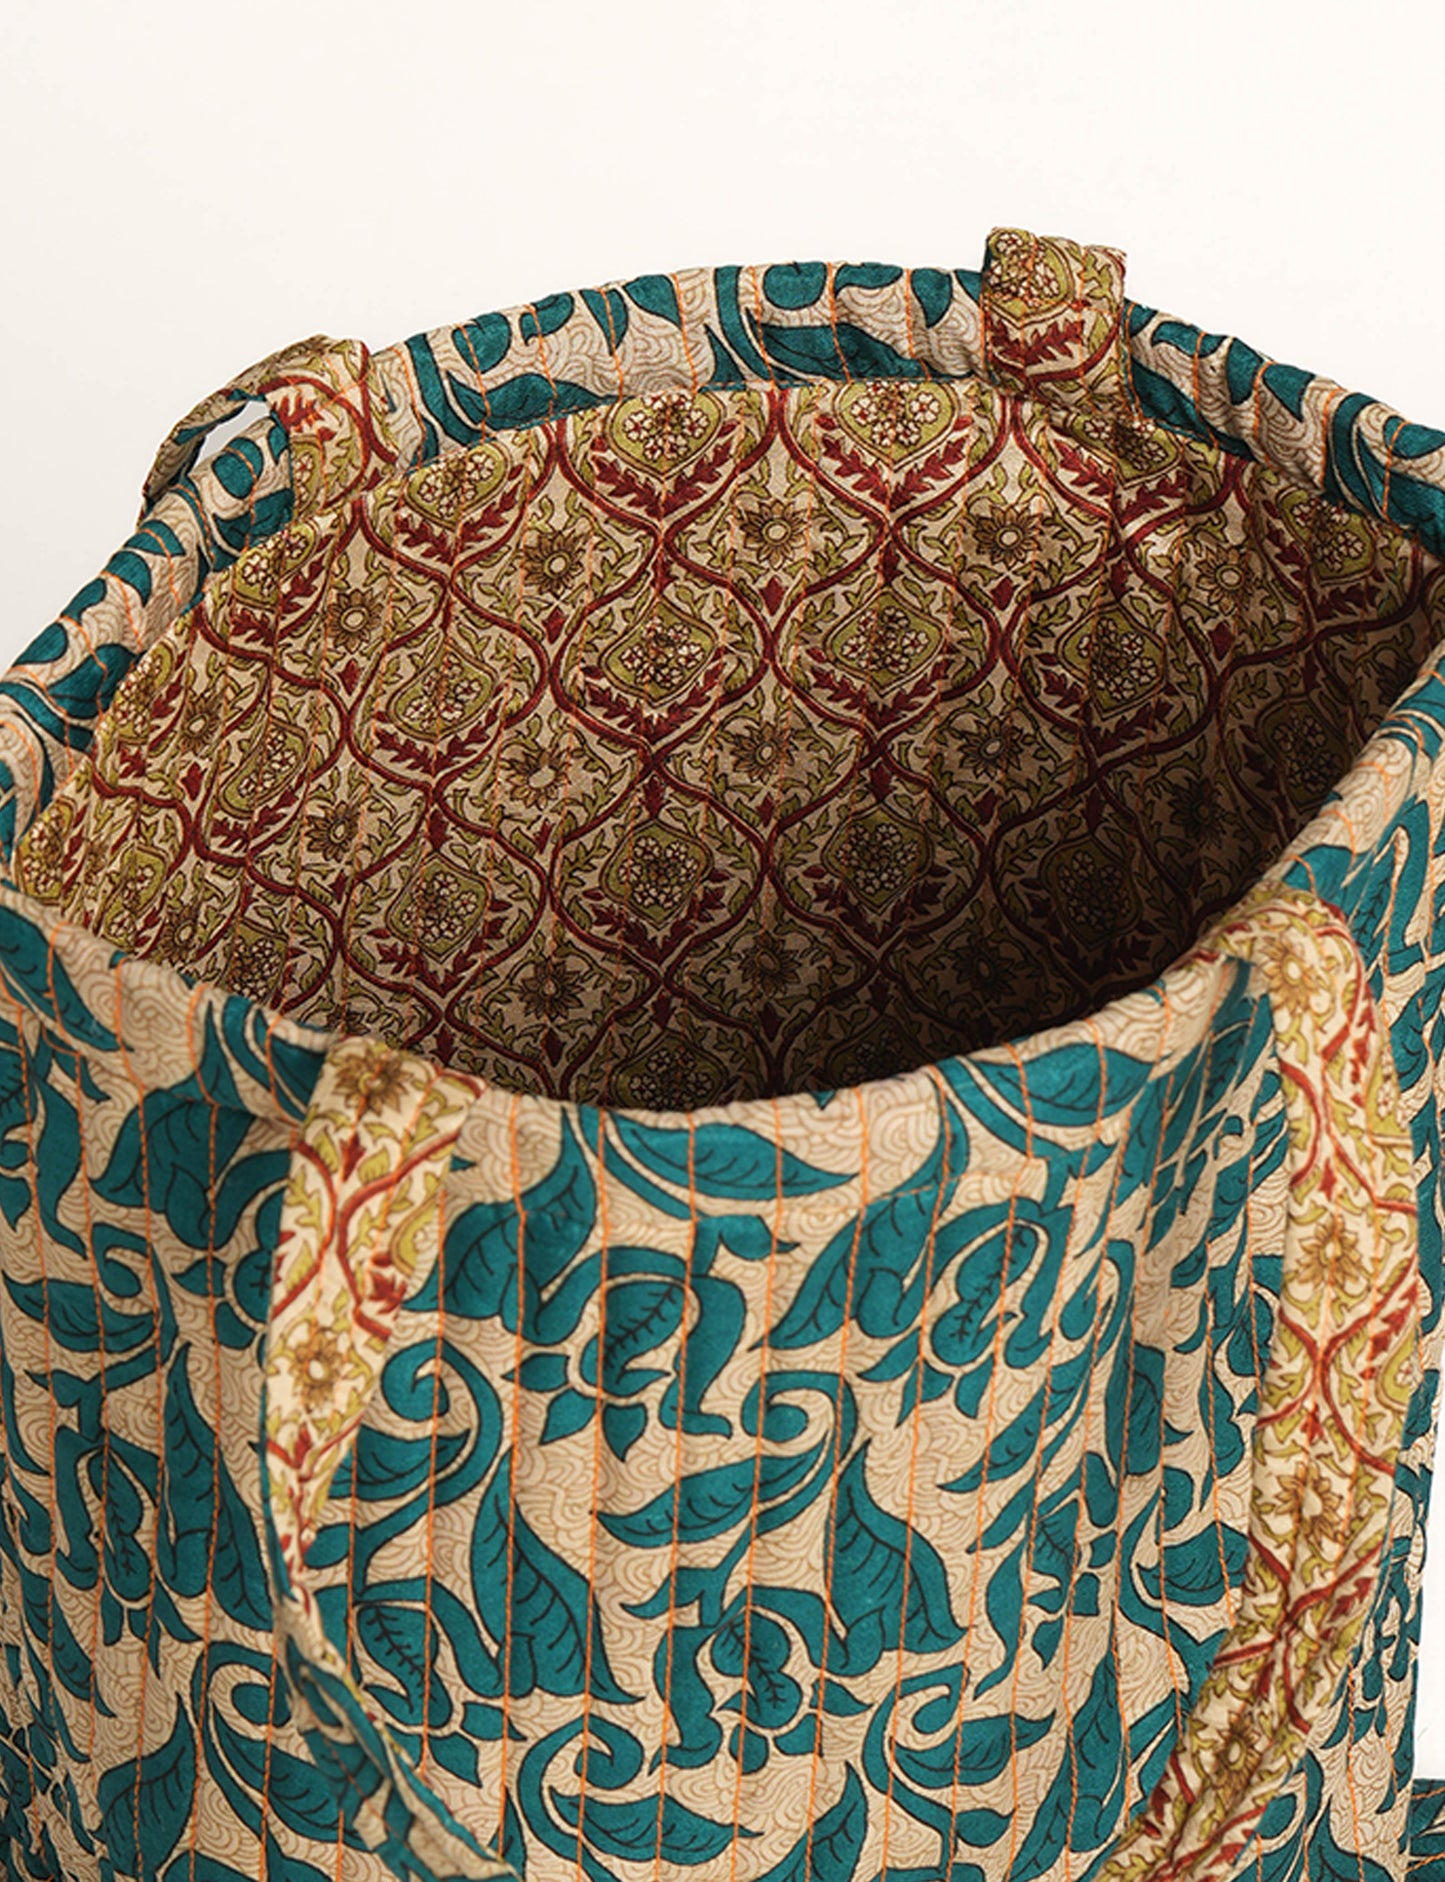 Elevate your style sustainably with our QUILTED SHOPPER BAG. Soft textures, vibrant colors, and a positive impact on people and the planet. Perfect for the office, shopping, or happy hour. Crafted from pre-loved saris for eco-conscious fashionistas!